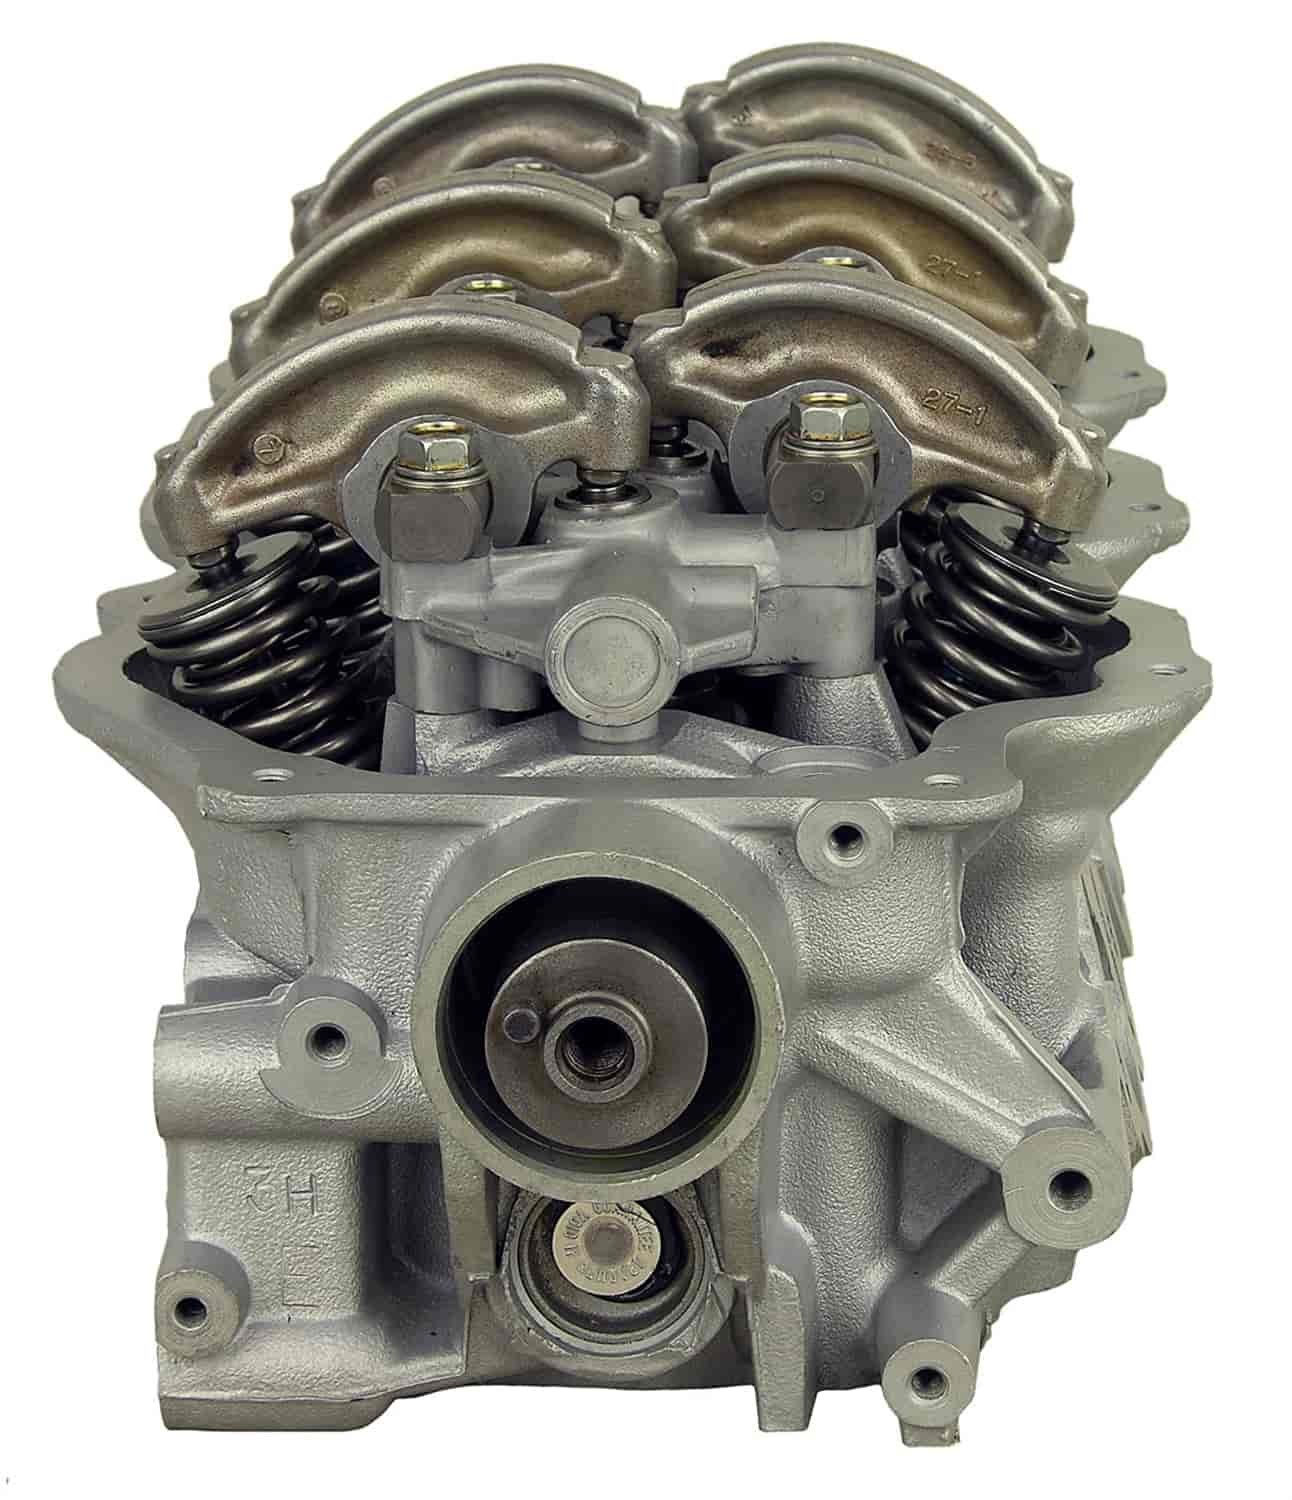 Remanufactured Cylinder Head for 1988-1998 Nissan/Mercury with 3.0L V6 VG30E